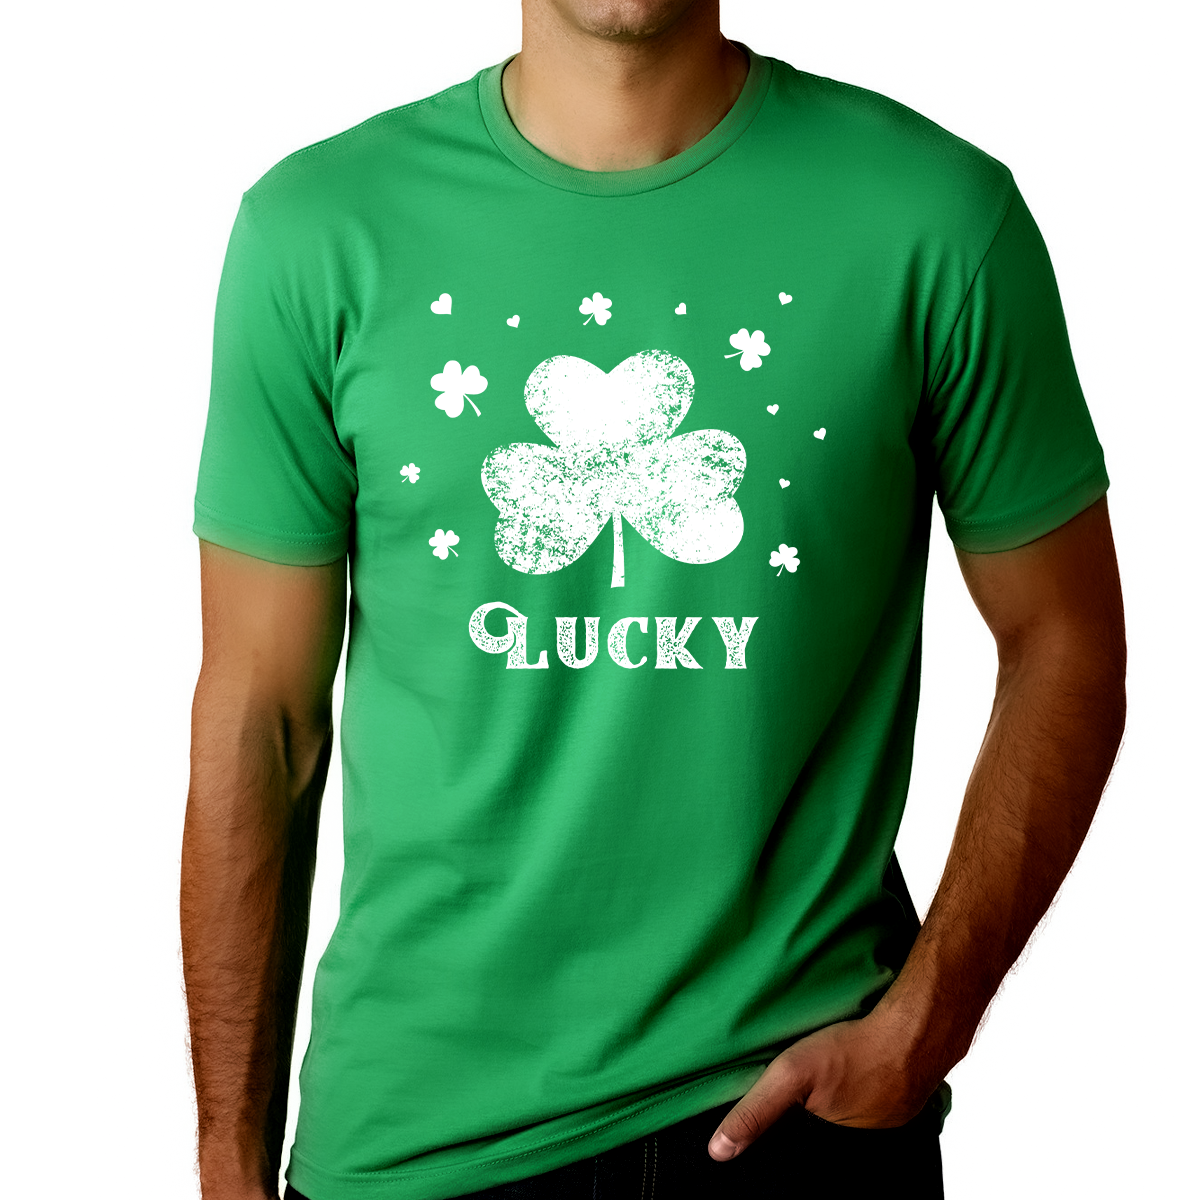 St Pattys Day Shirts For Men Lucky Shamrock Shirt St Pattys Day Shirts For Men Irish Clover Shirt